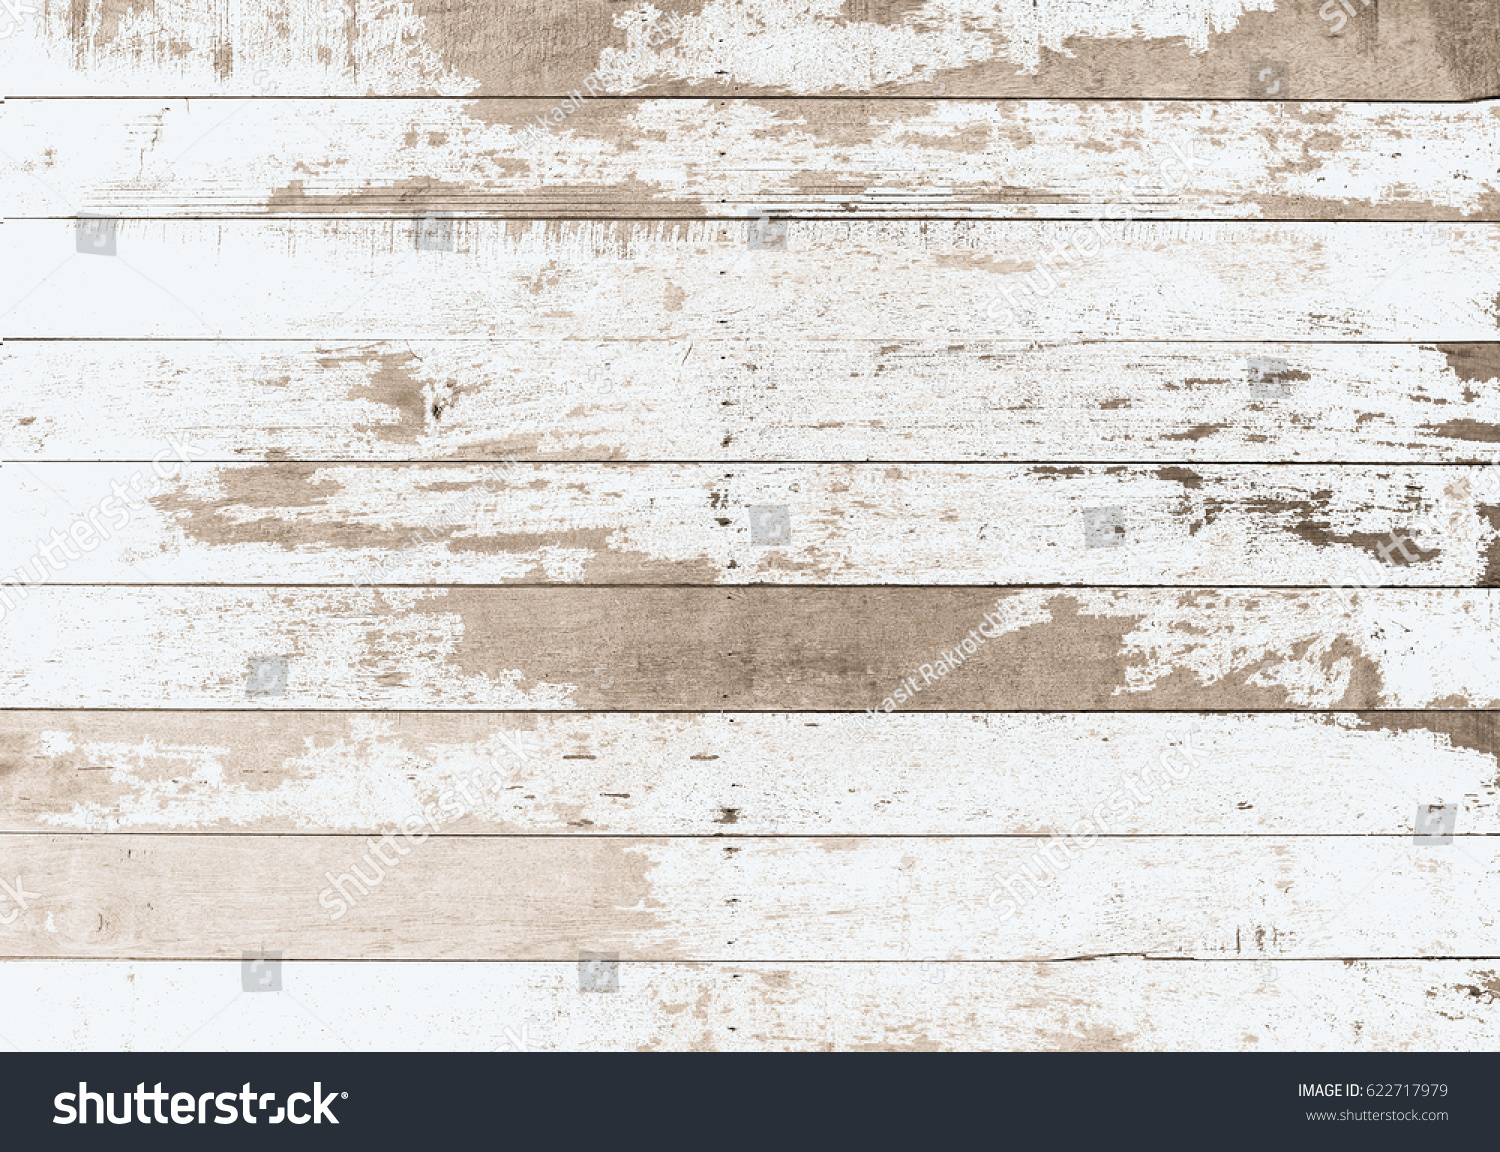 wooden board white old style abstract background objects for furniture.wooden panels is then used.horizontal #622717979